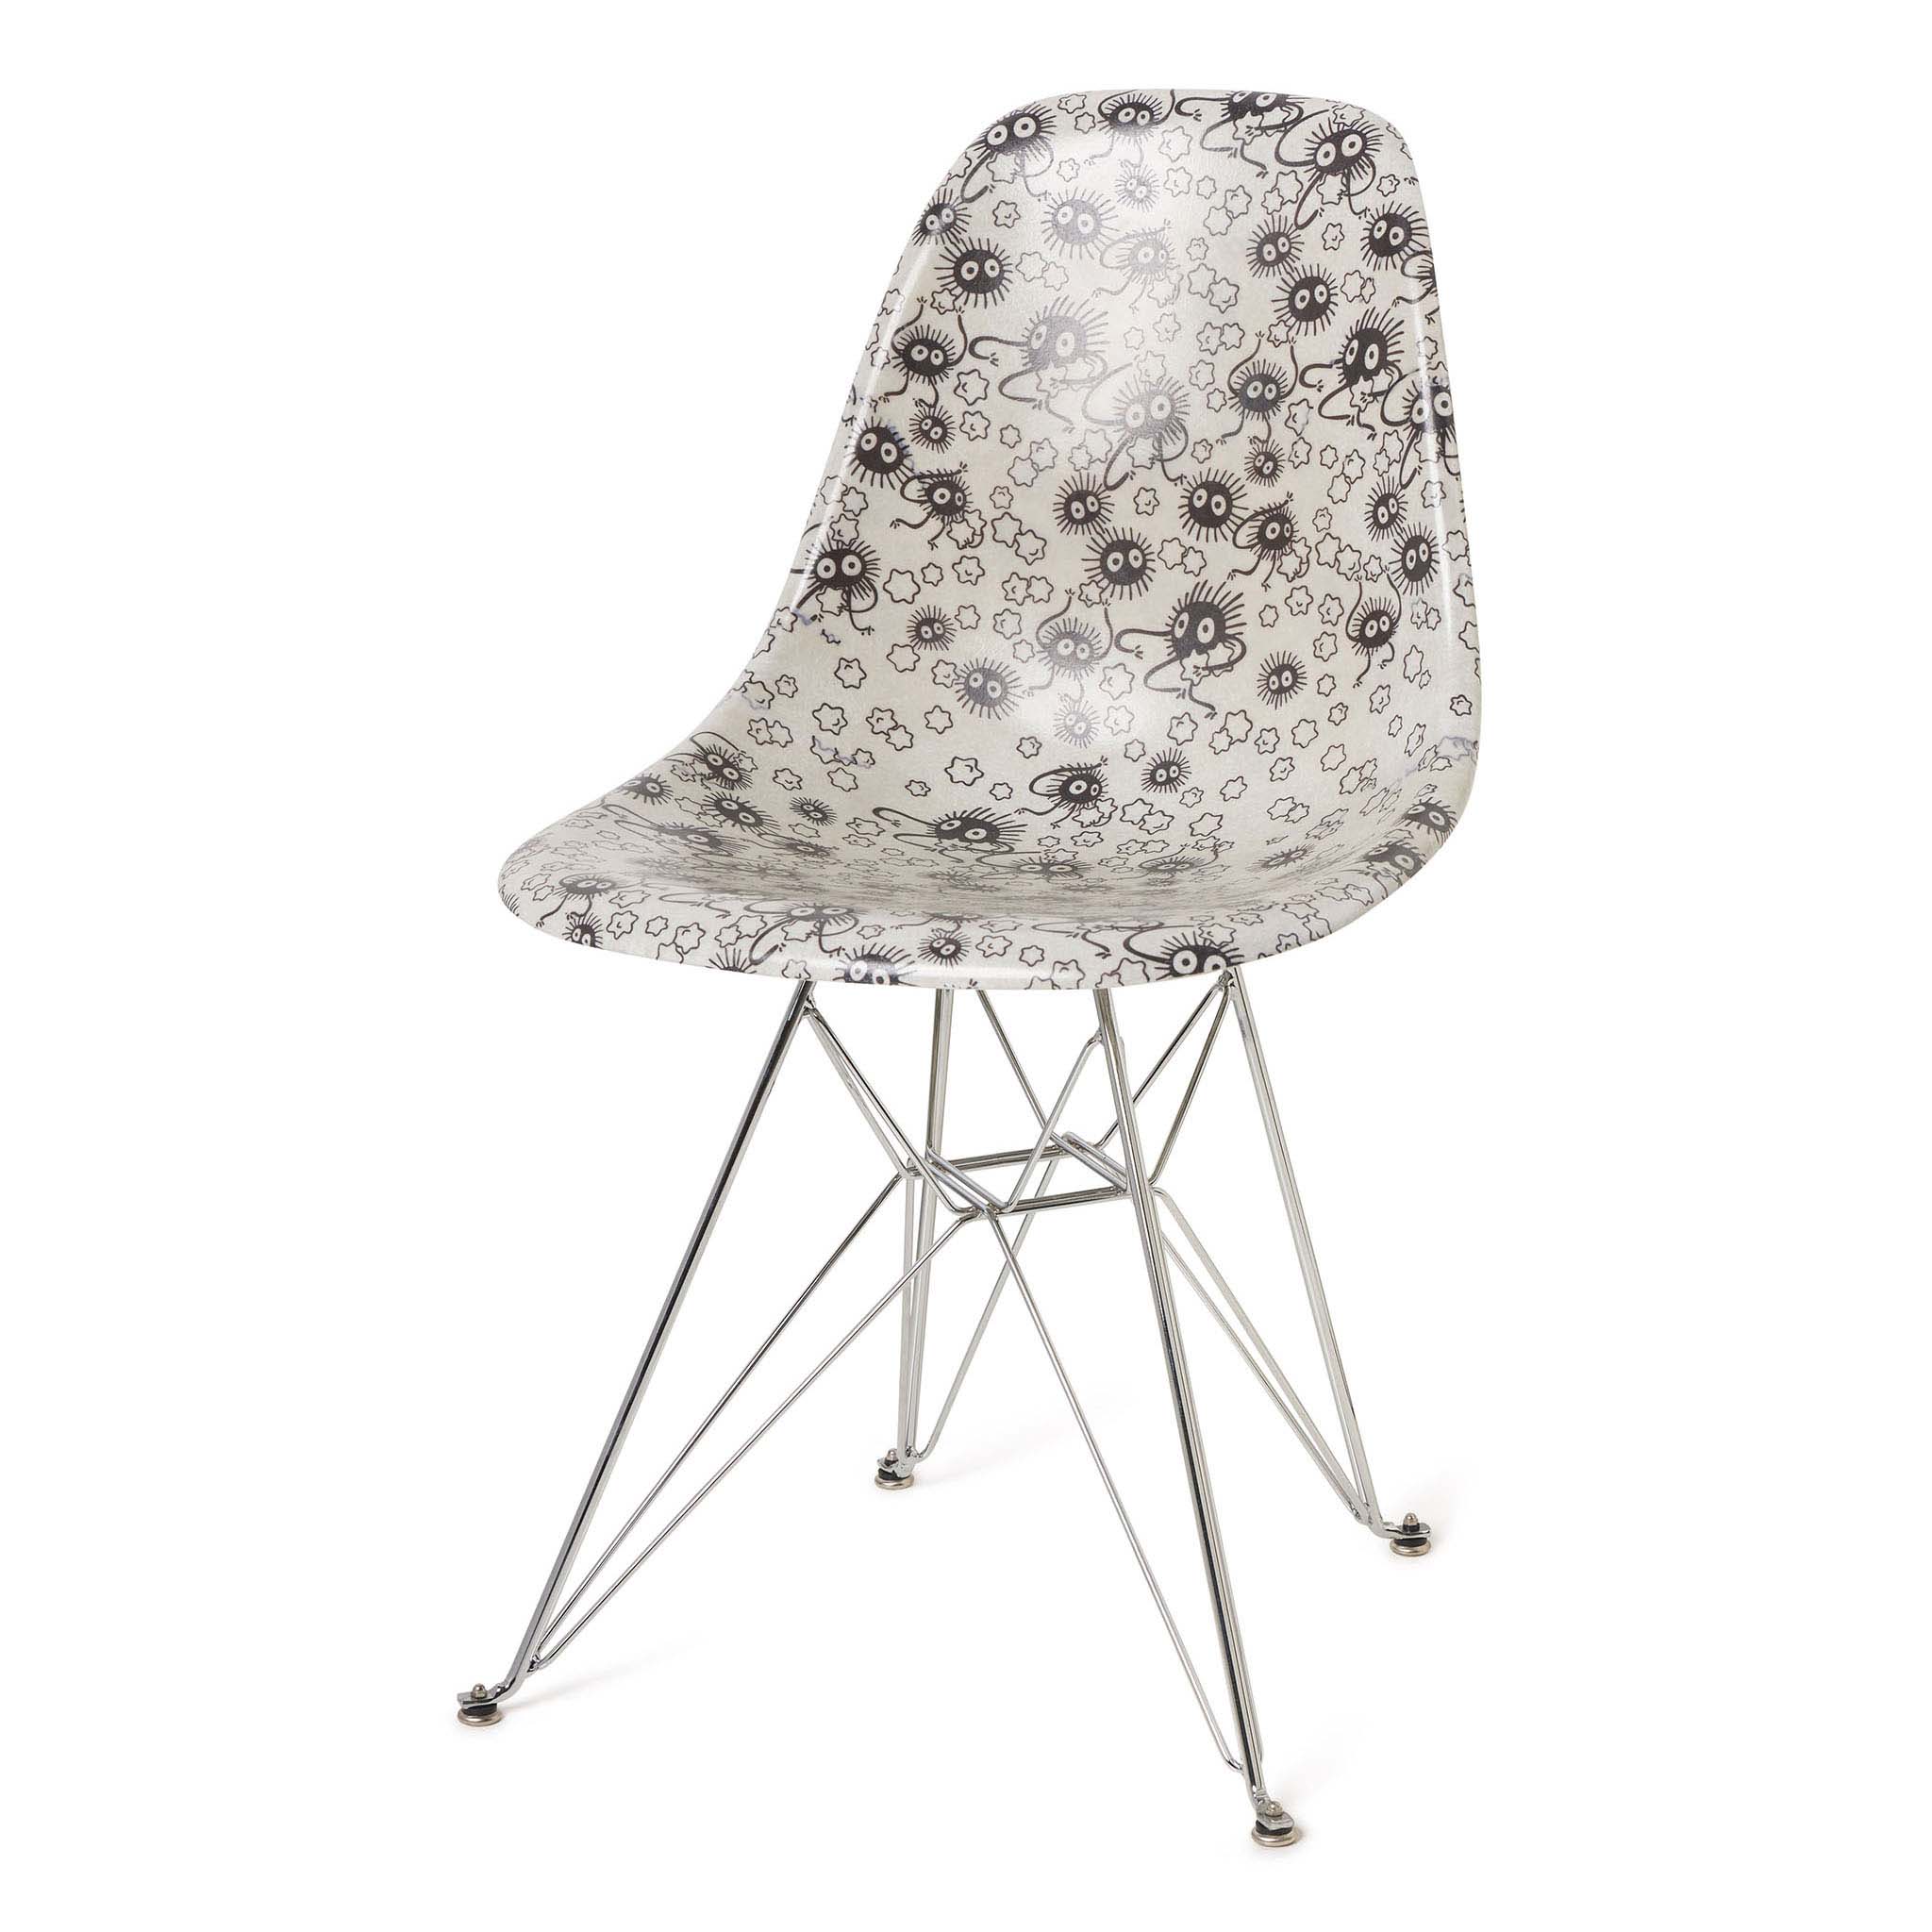 SOOT SPRITES SIDE CHAIR